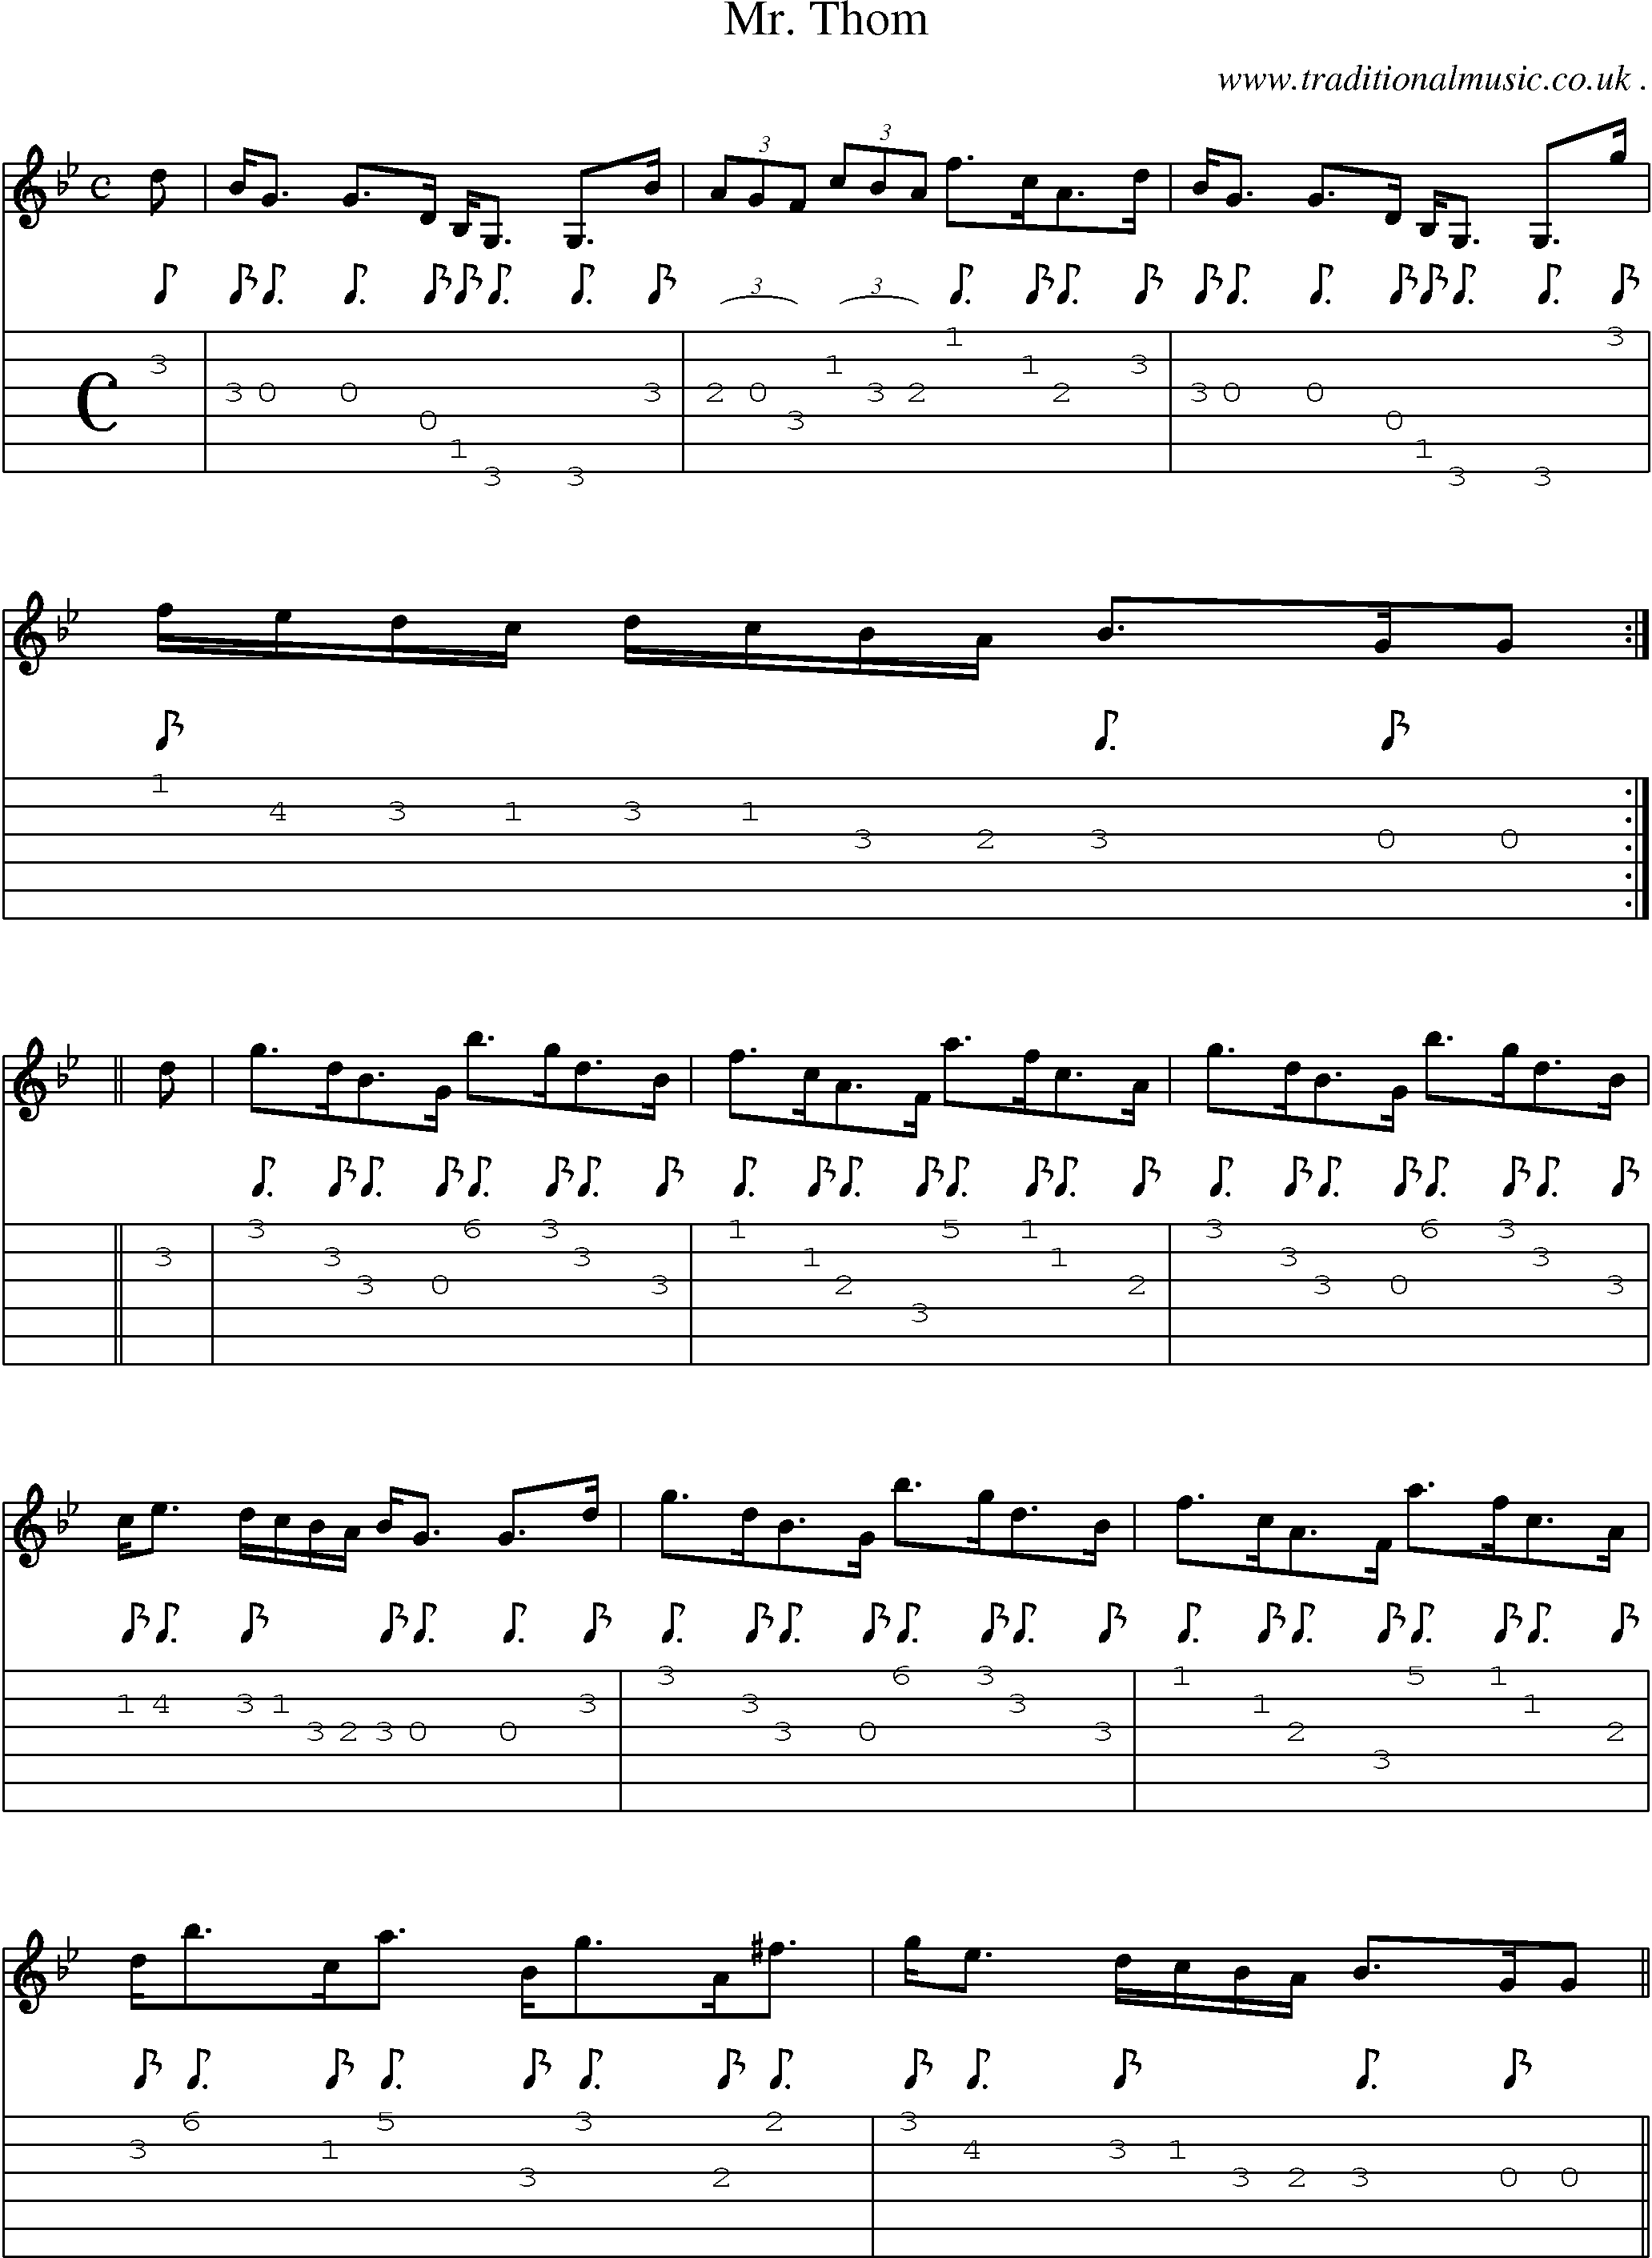 Sheet-music  score, Chords and Guitar Tabs for Mr Thom